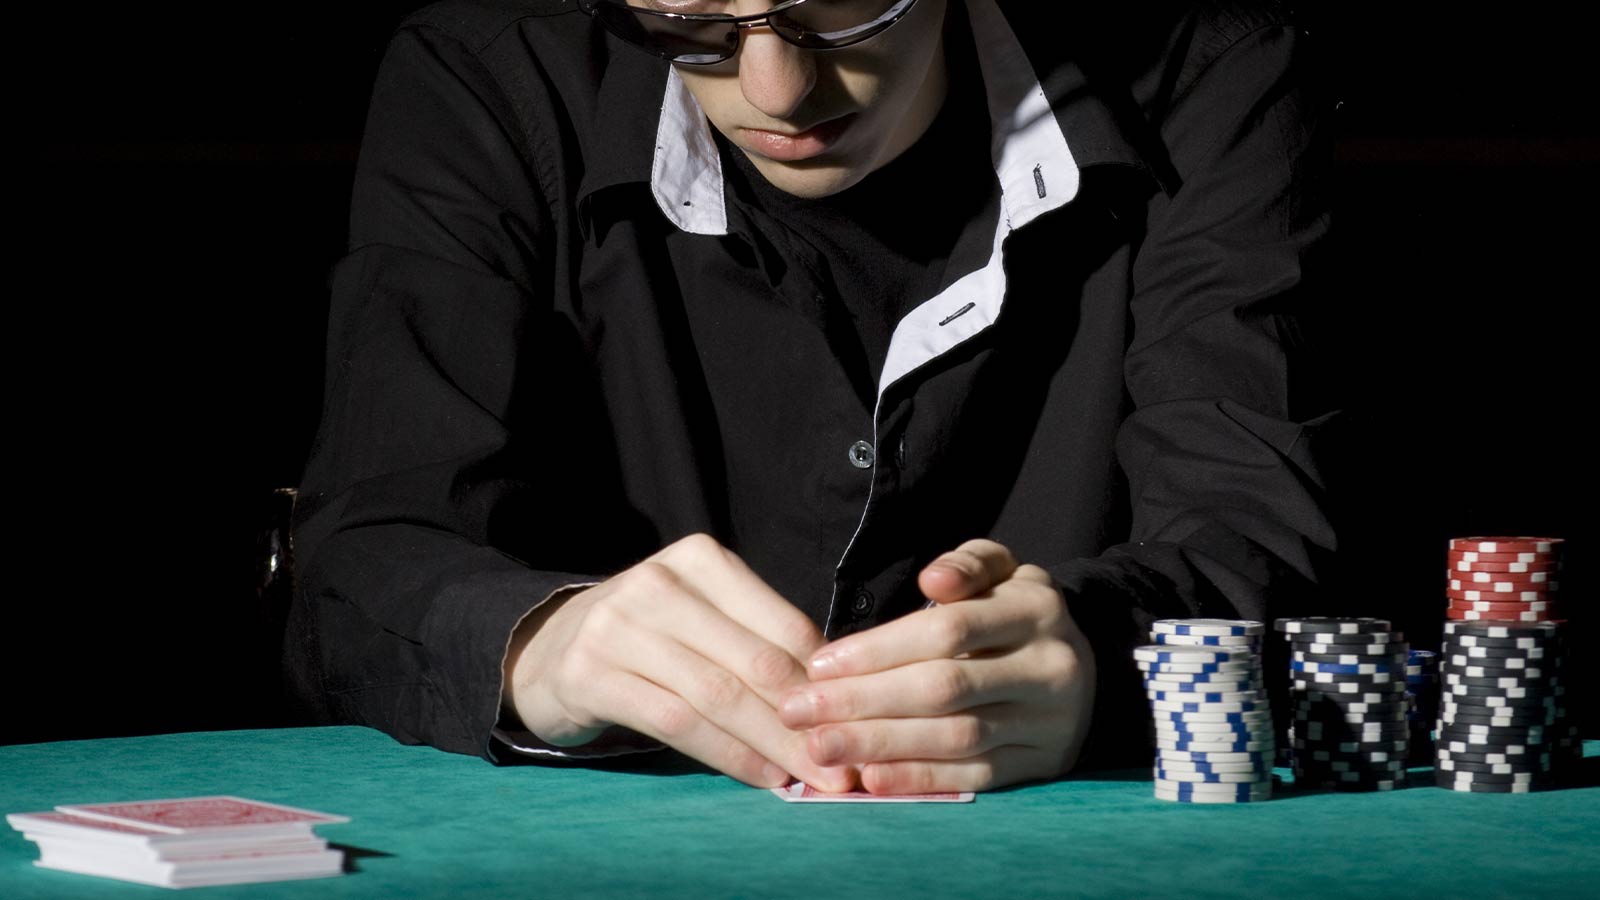 How can Visually Impaired Players Gamble Easily